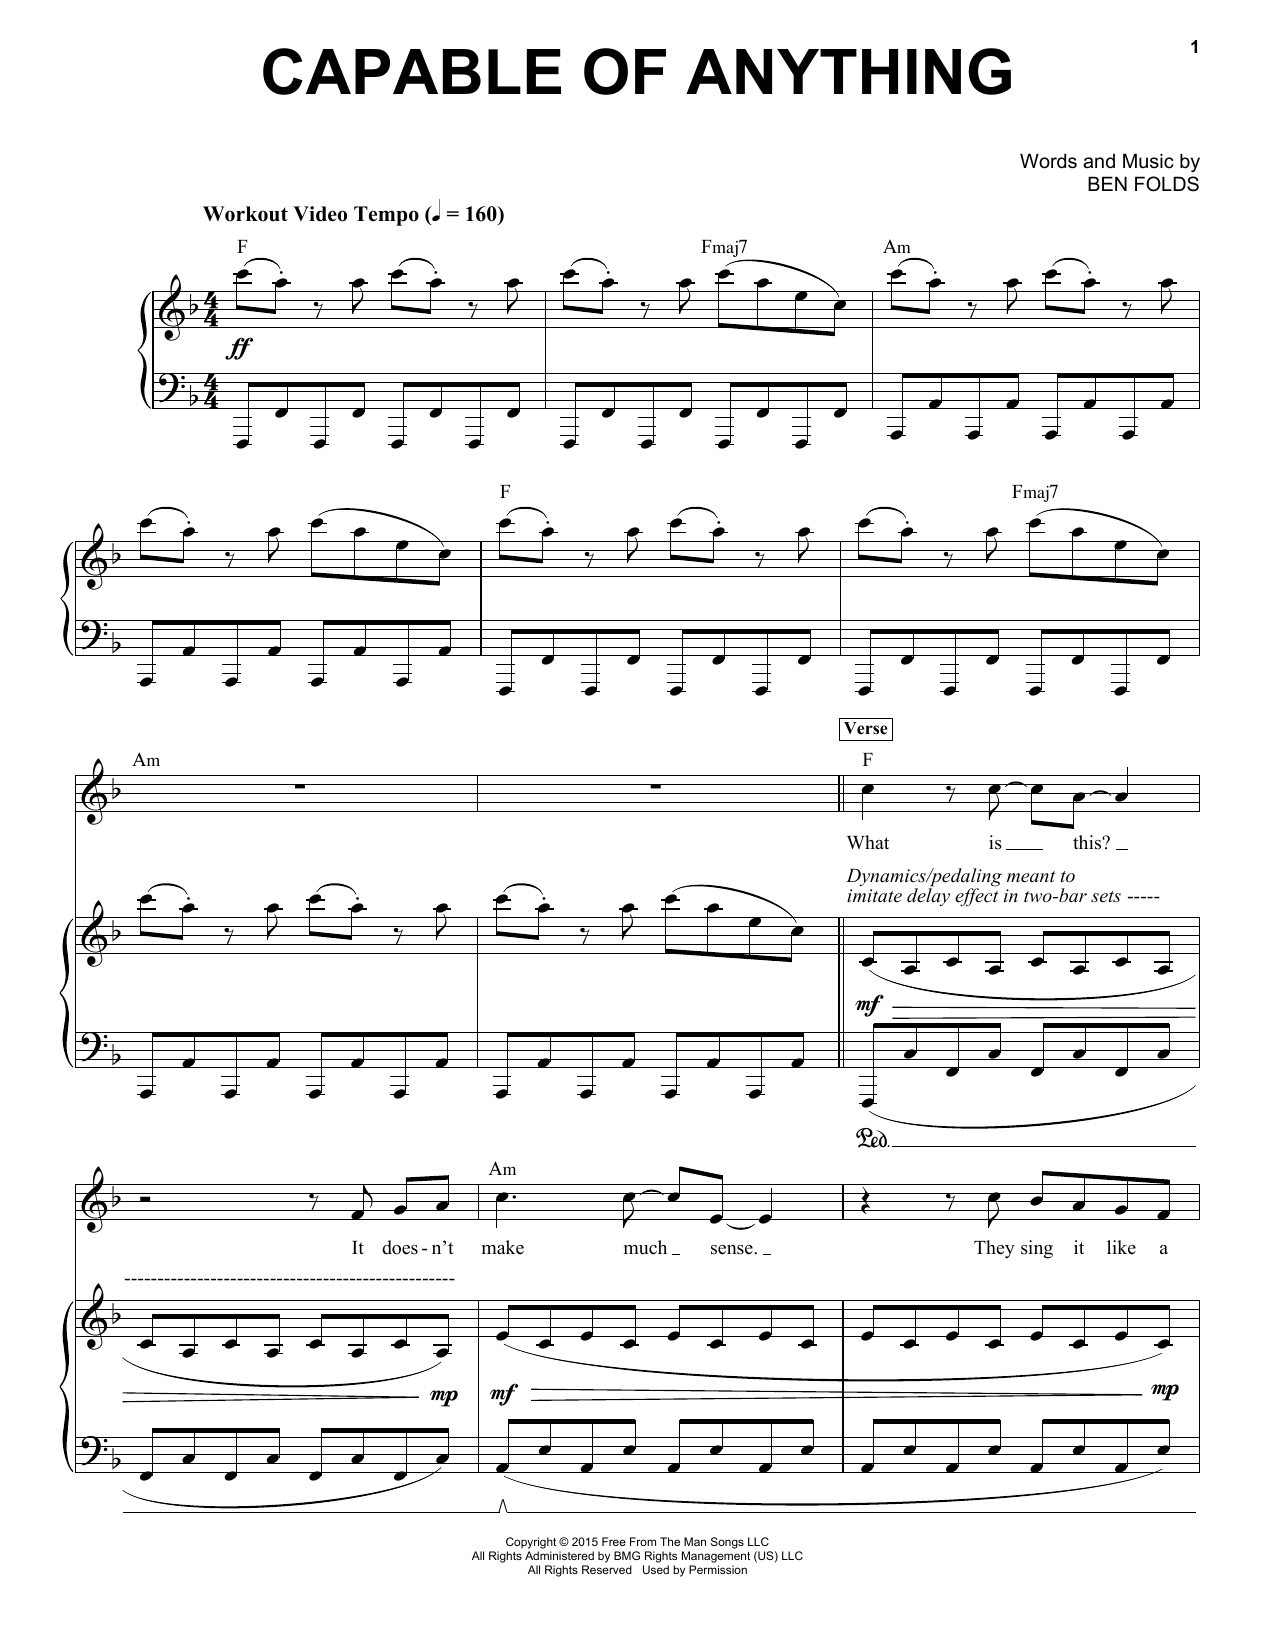 Ben Folds Capable Of Anything sheet music notes and chords. Download Printable PDF.